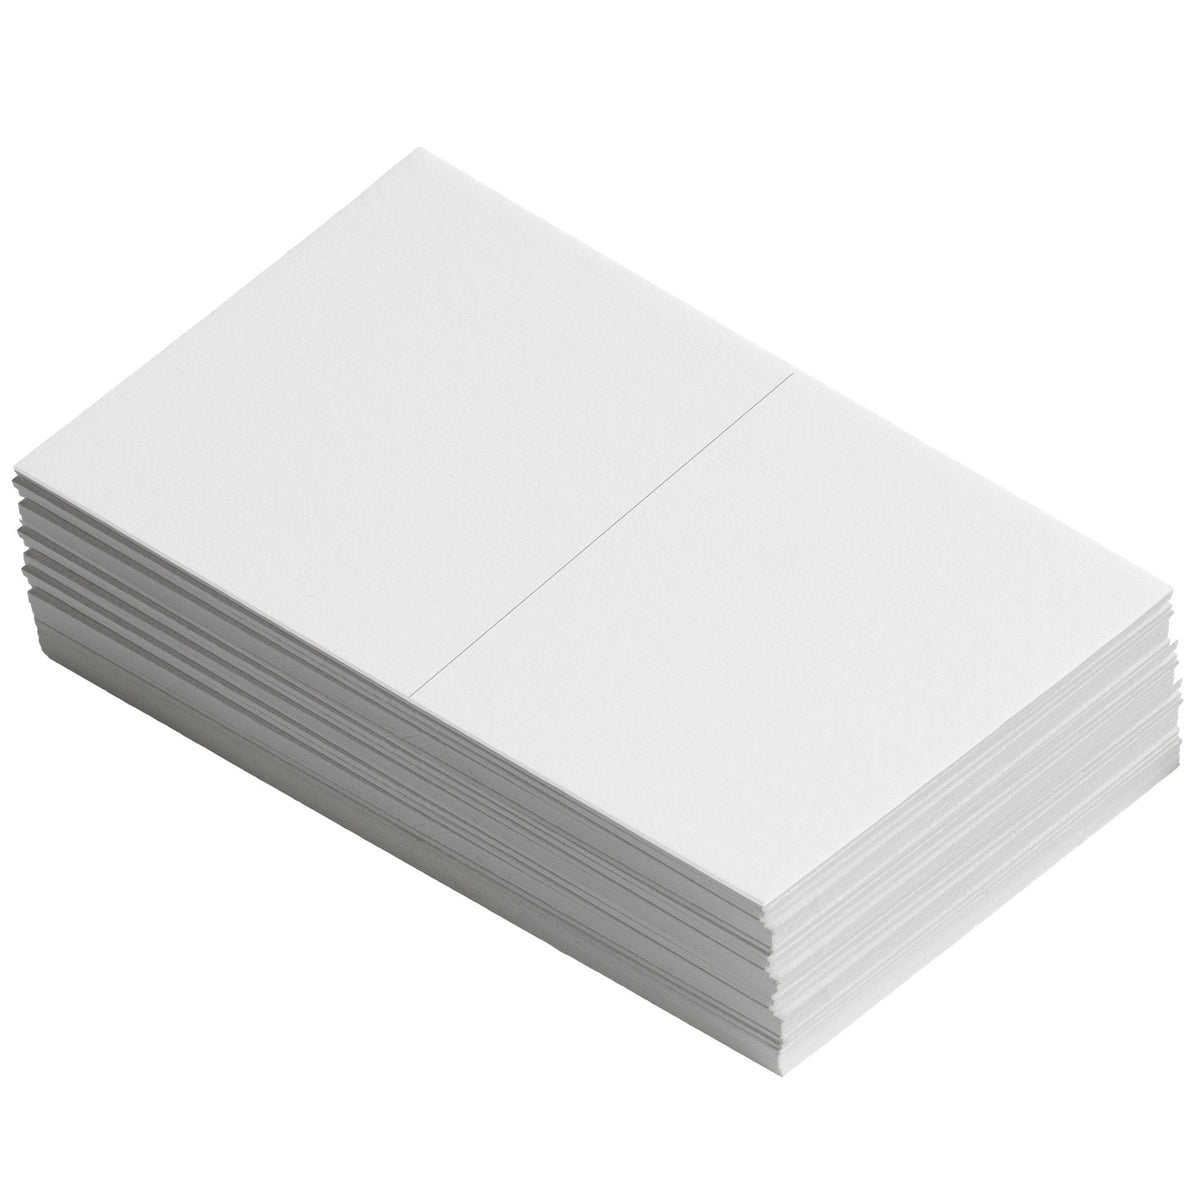 2 in 1 Half Sheet Self Adhesive Labels for Laser Ink Jet Printers - 1000 Pieces